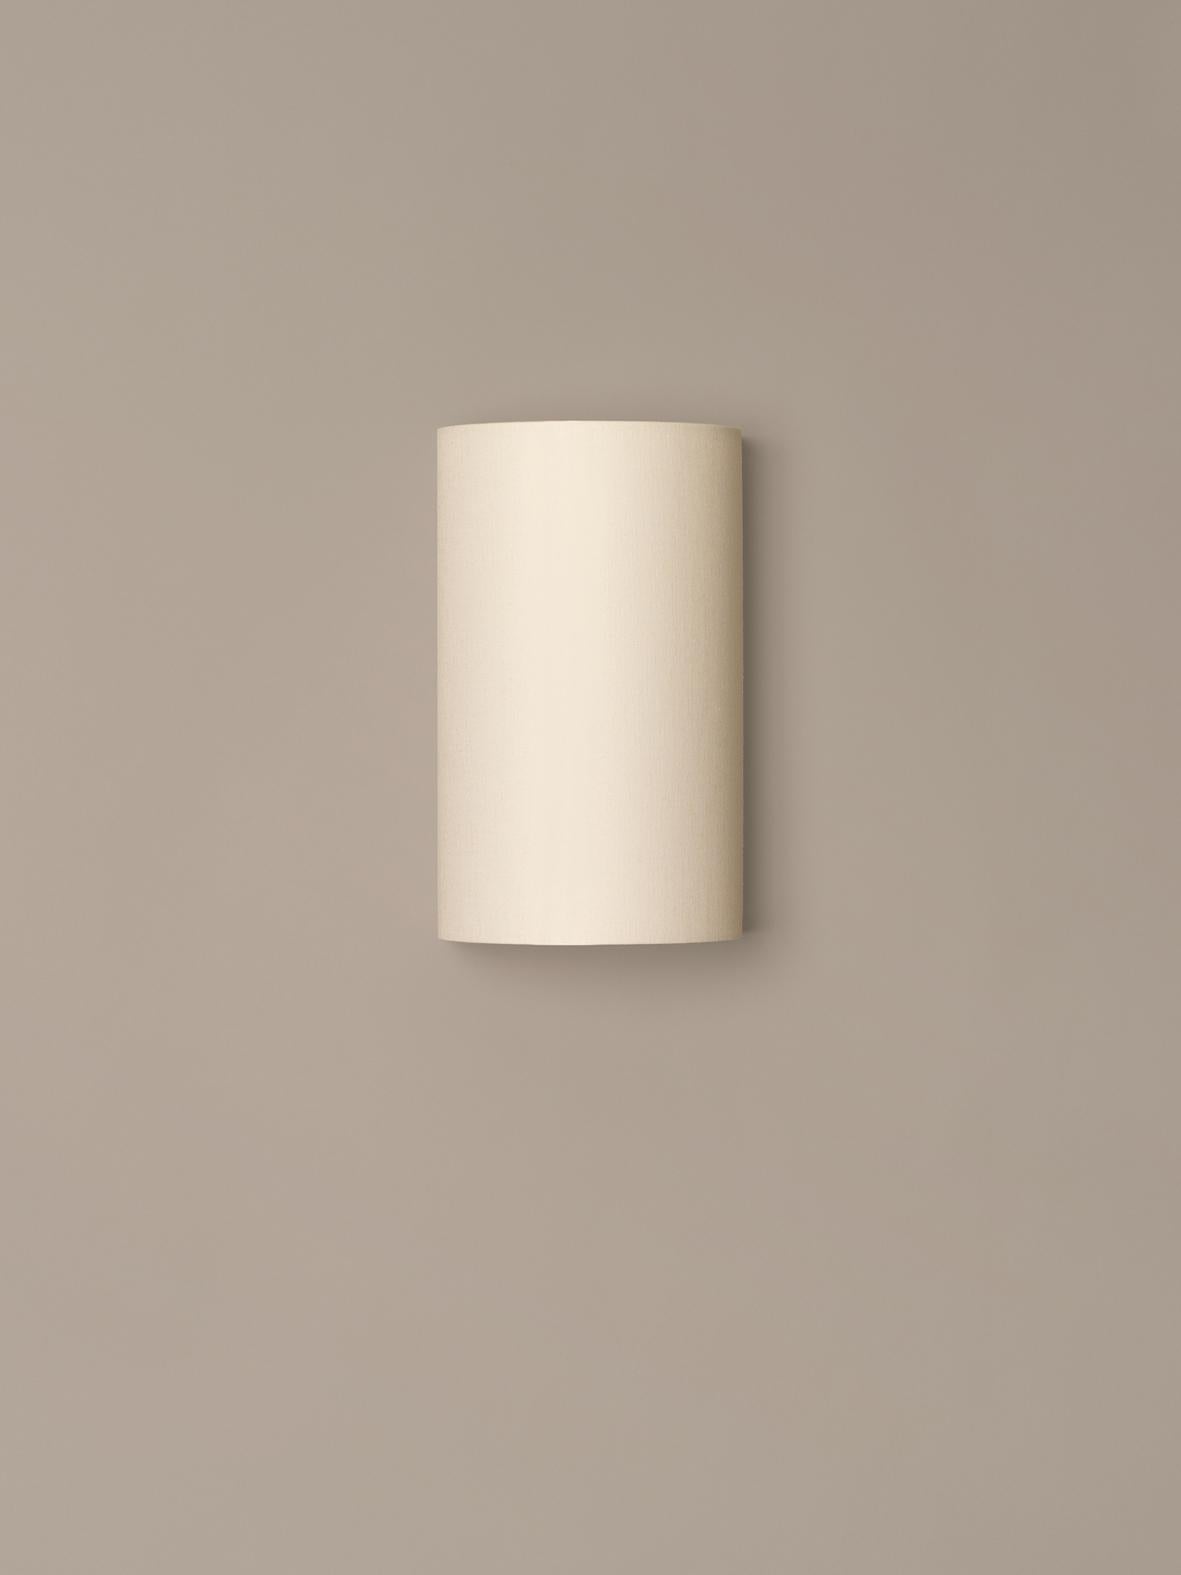 Singular wall lamp by Miguel Milá
Dimensions: D 18 x W 15.5 x H 30 cm
Materials: Metal, linen.

A lightweight shade of white linen conceals a chrome-plated structure that holds the light source, with clean lines than conceal all and show